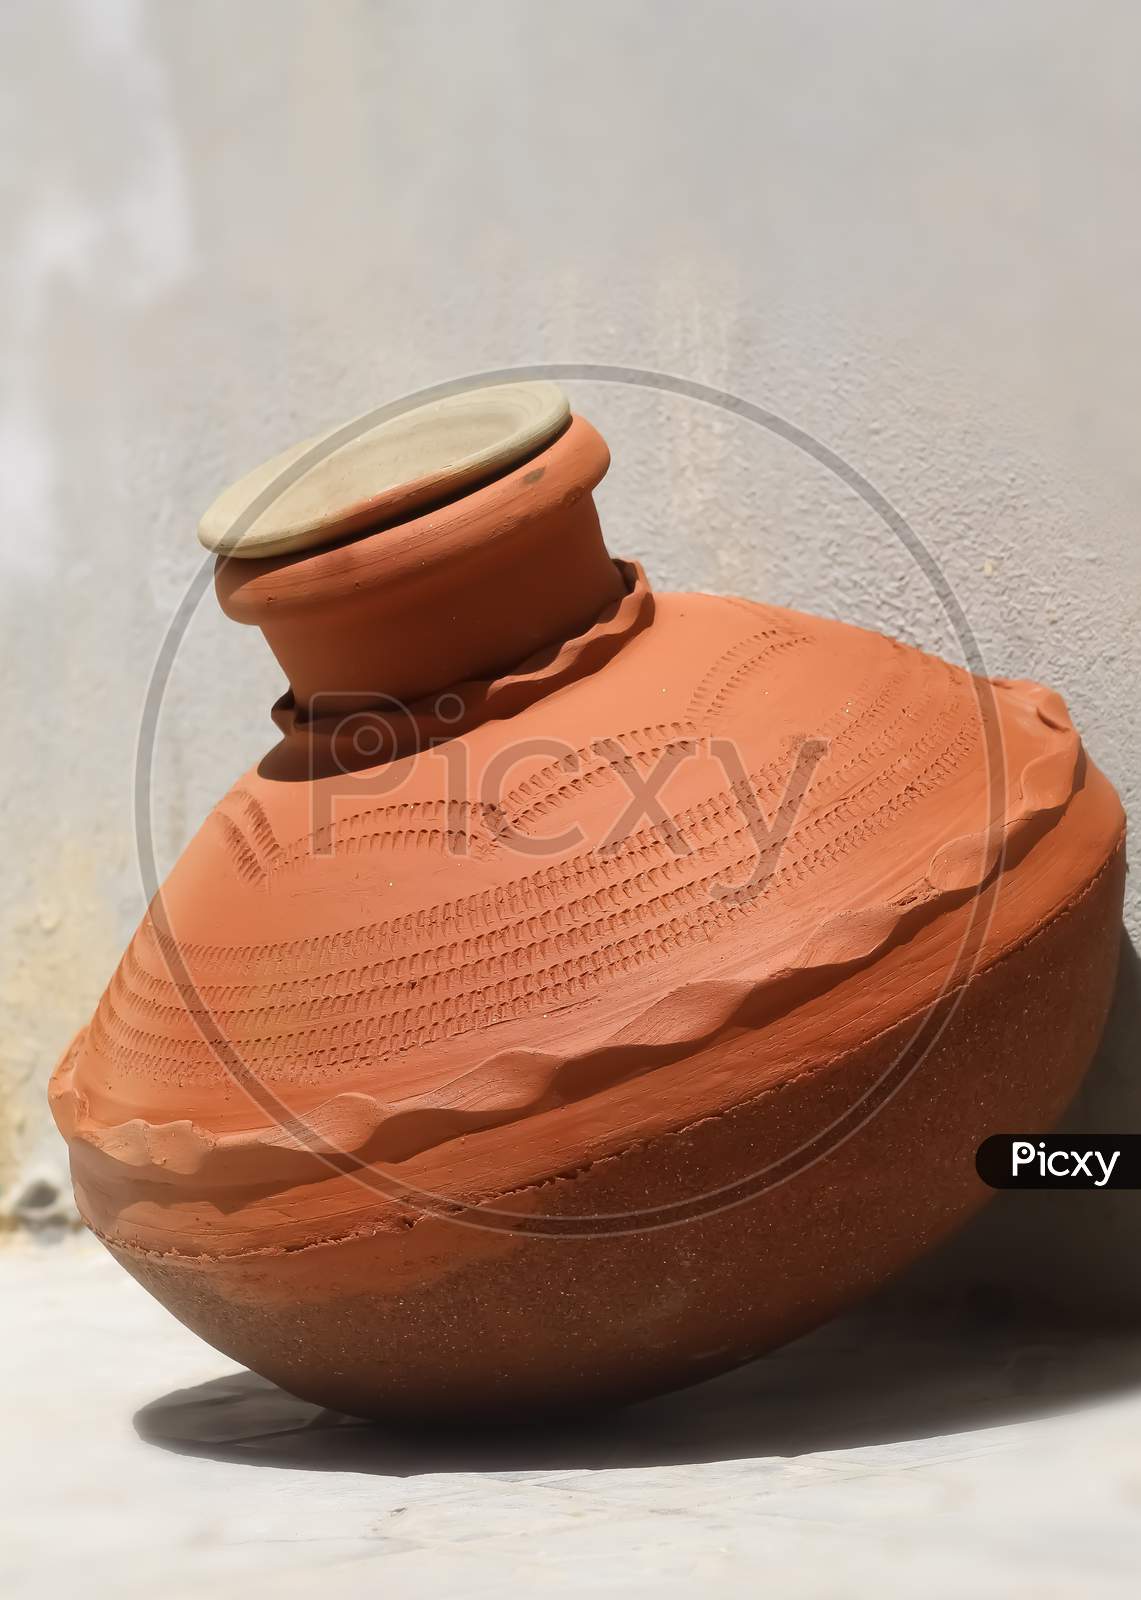 A beautiful clay pitcher